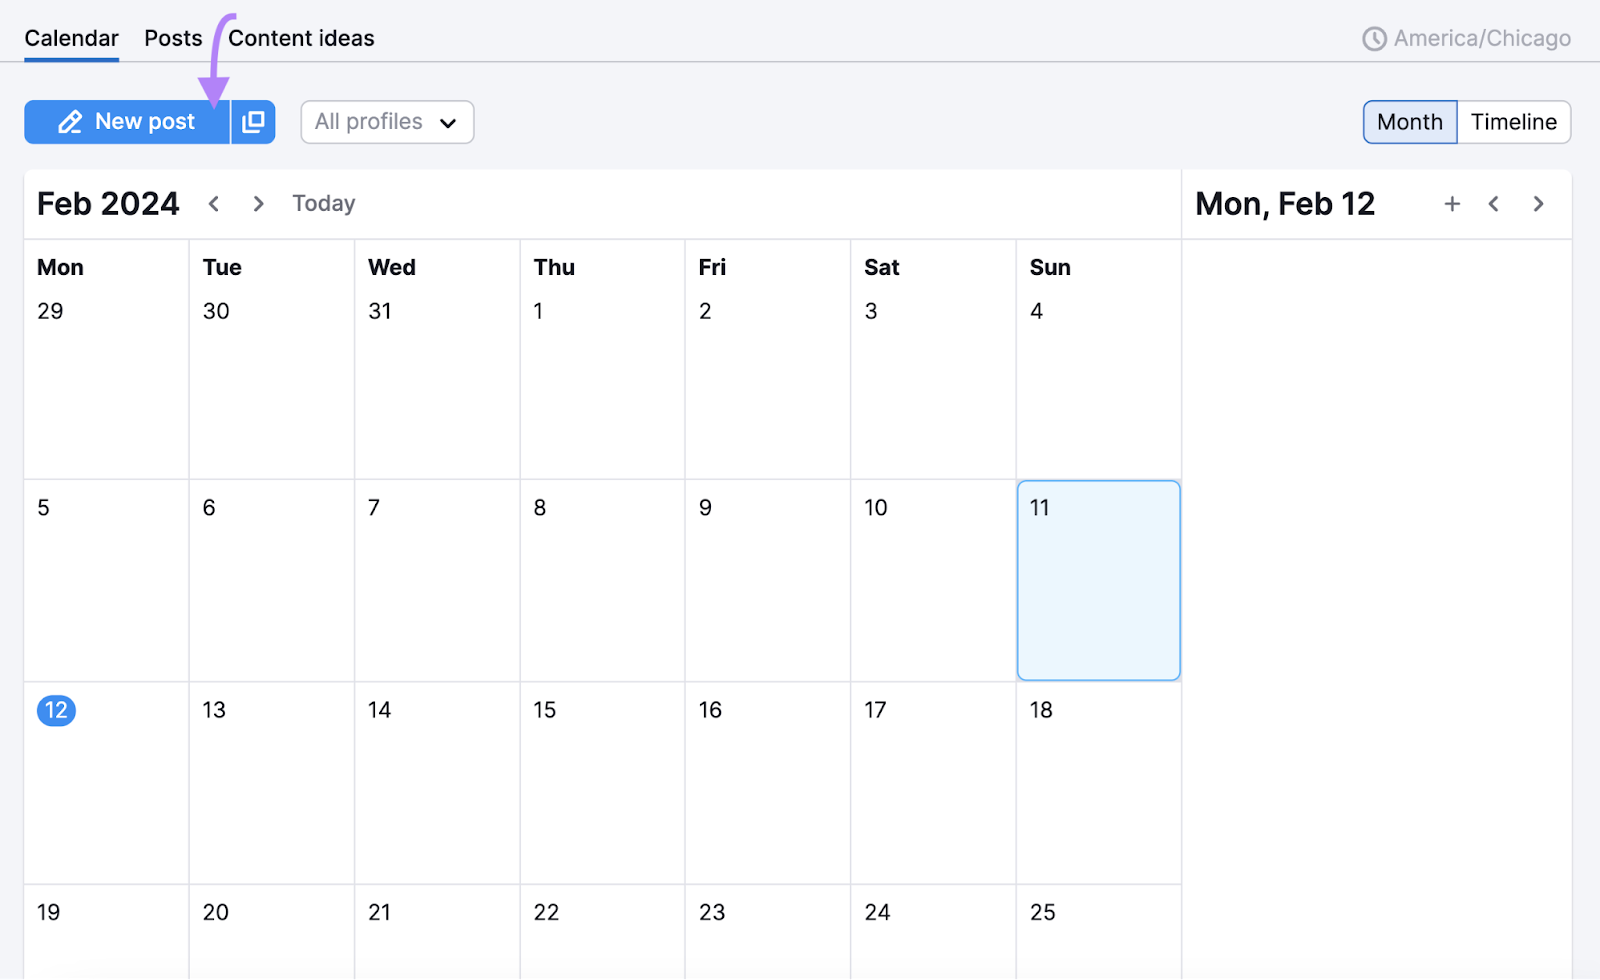 "New post" button highlighted at the top left of the calendar in Social Poster tool